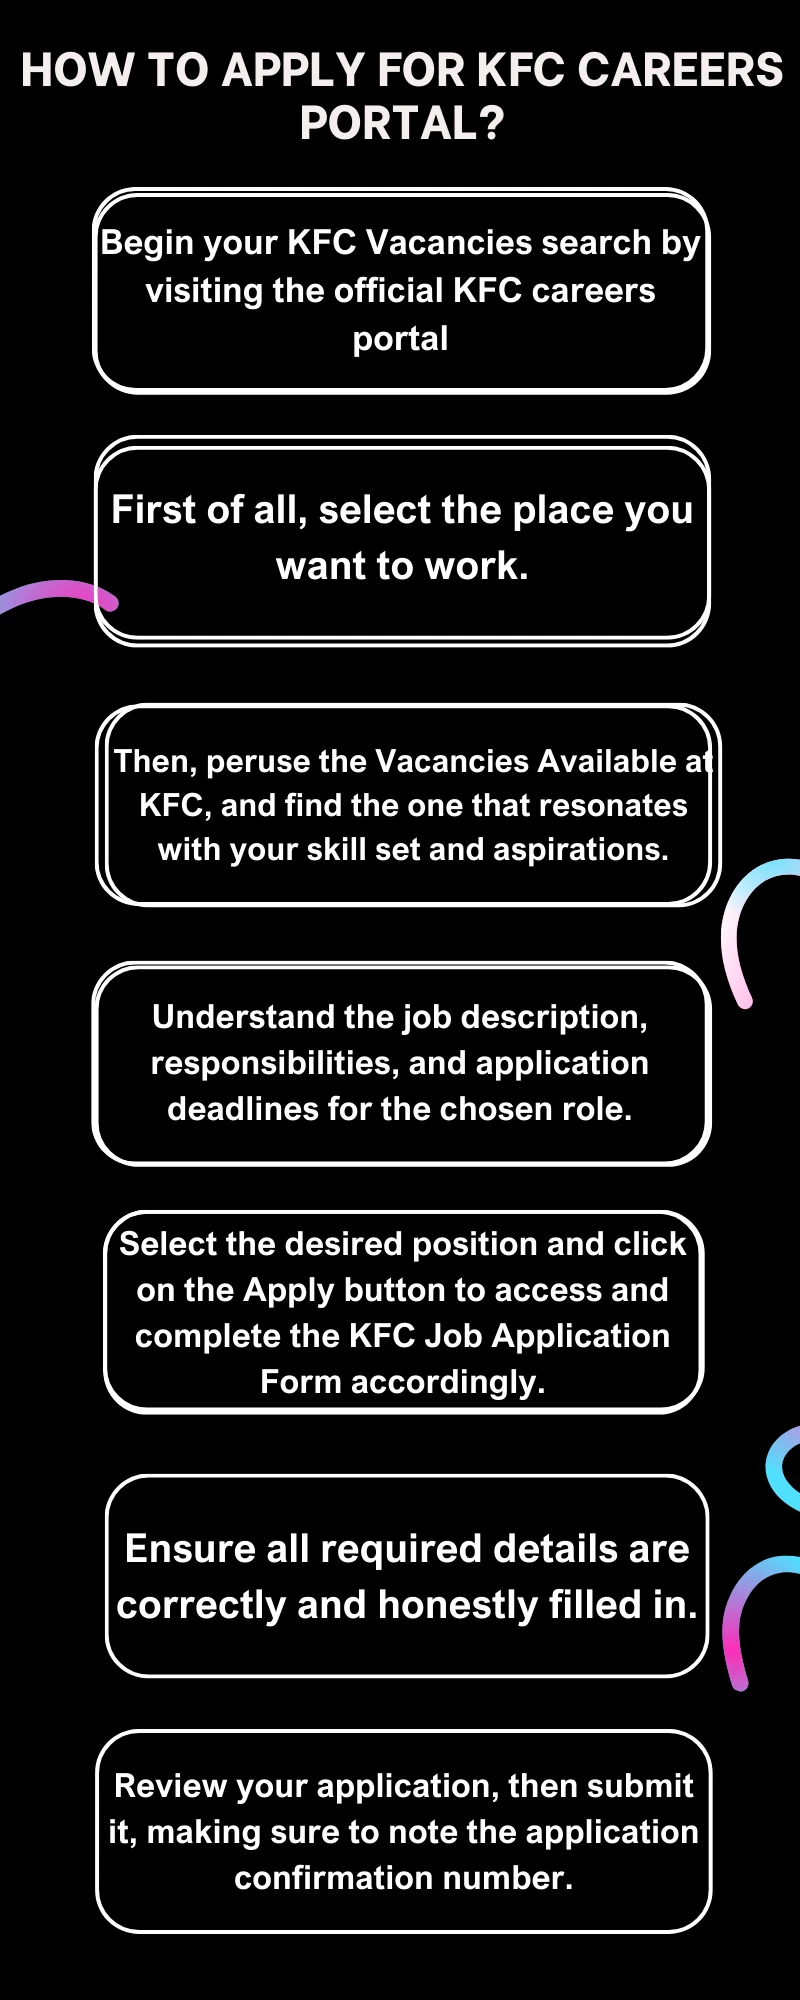 How To Apply for KFC Careers Portal?